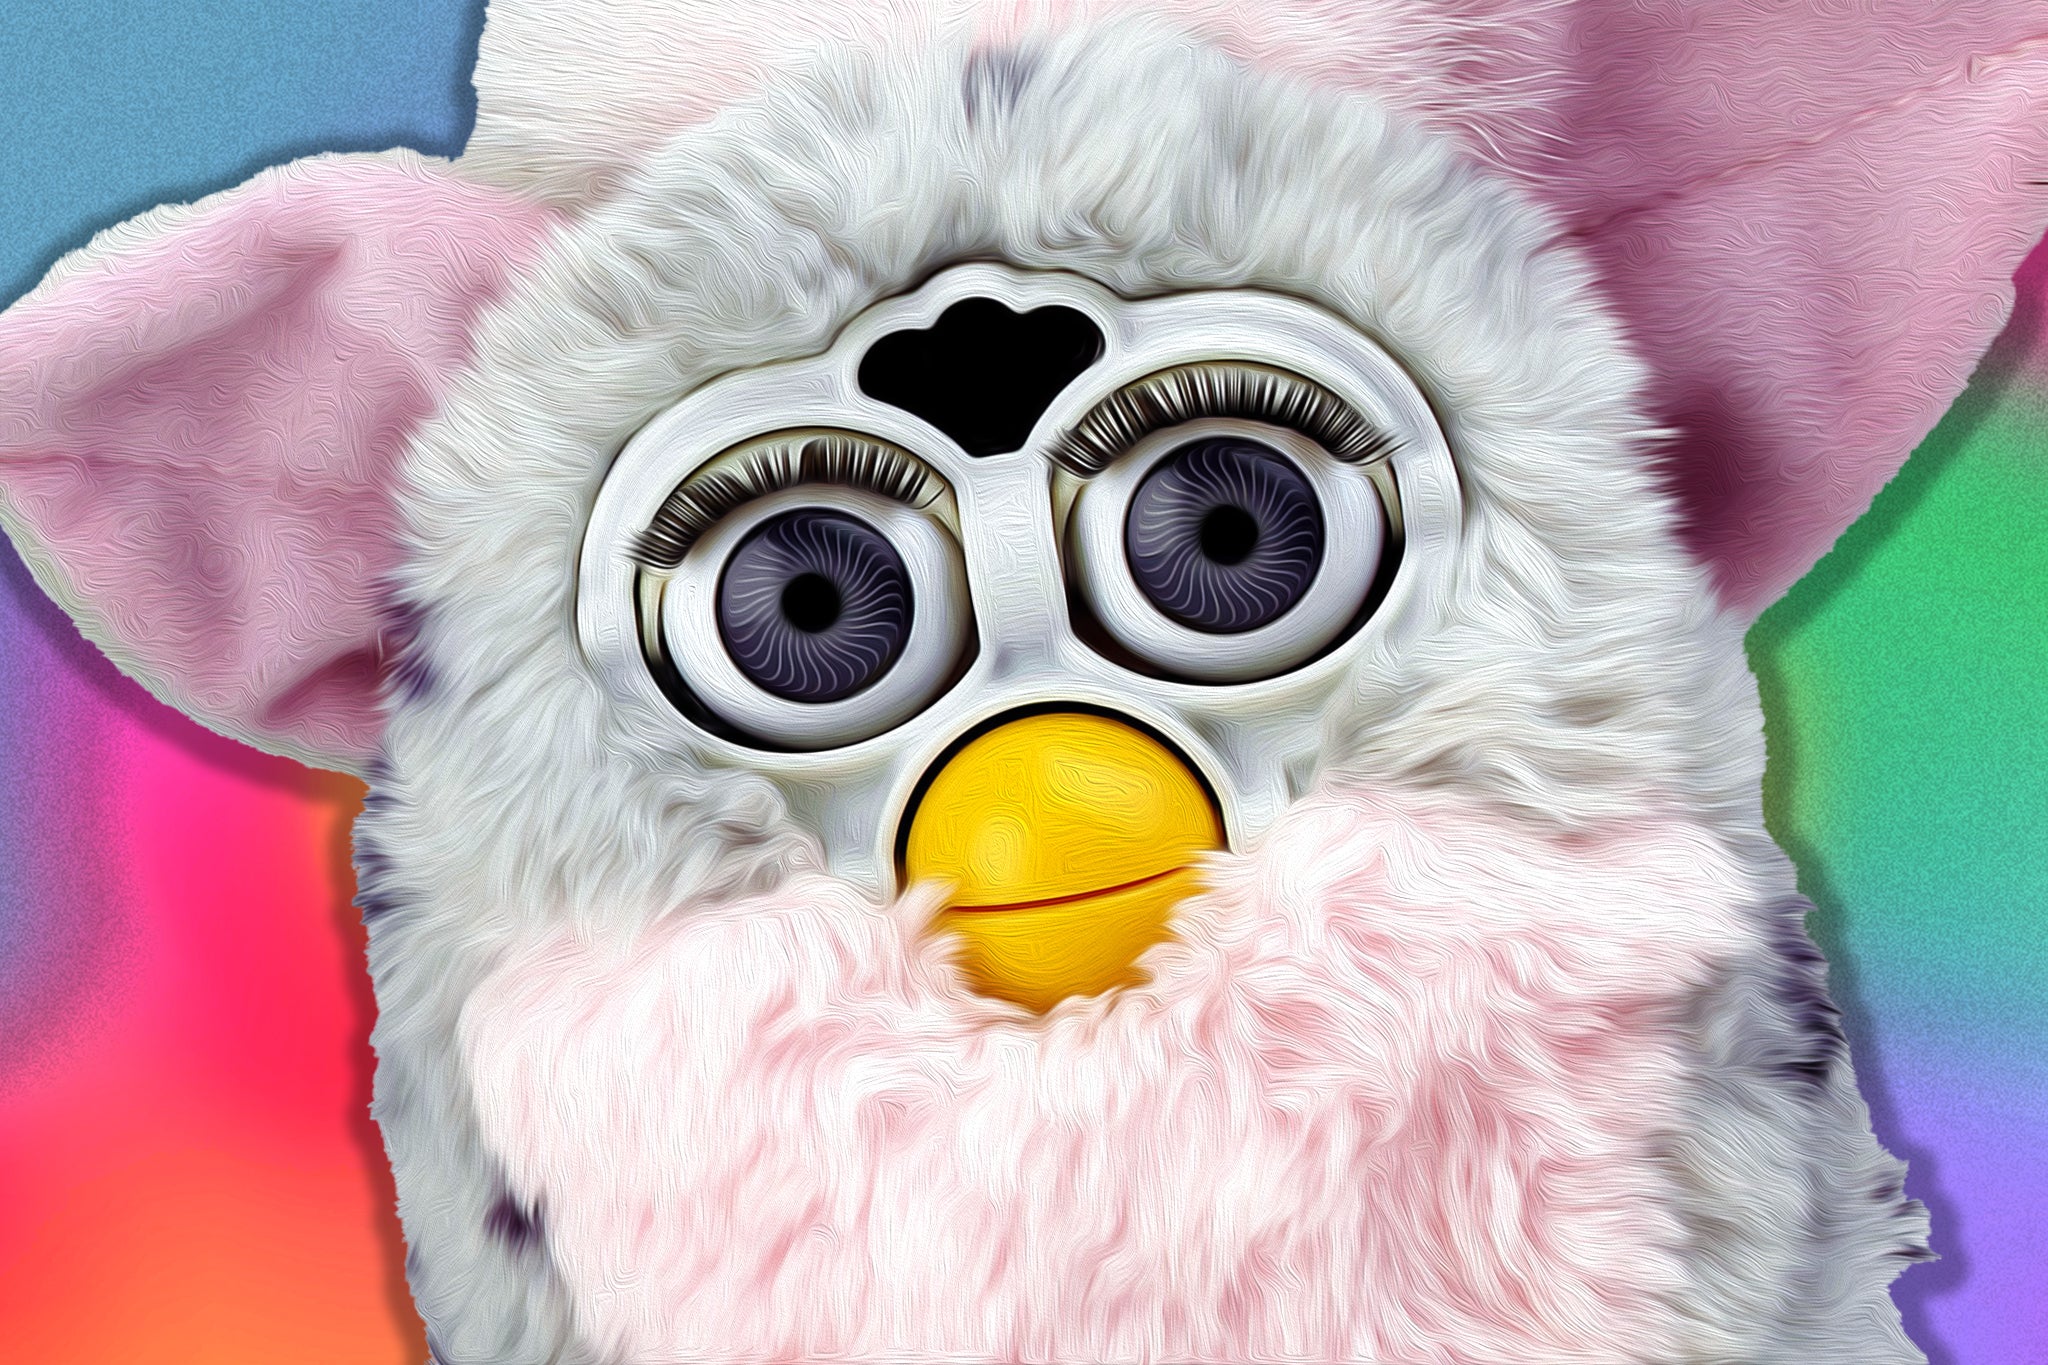 ‘It wouldn’t shut up and must have been possessed’: The almighty Furby